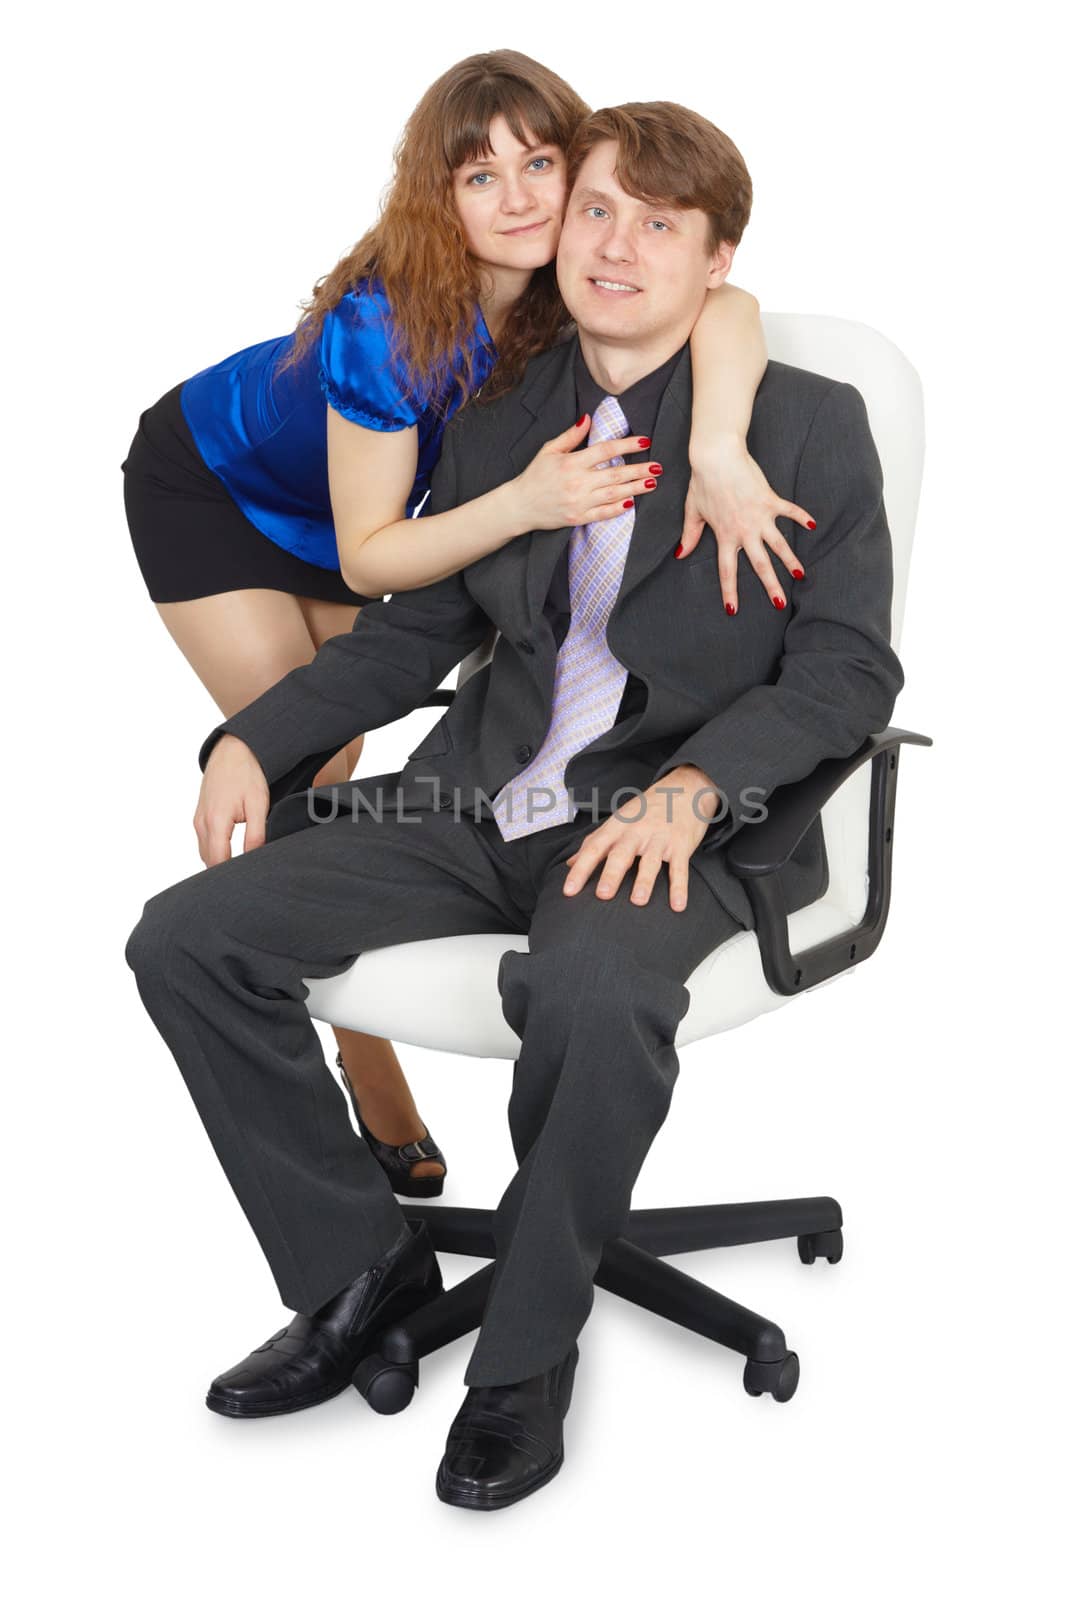 A woman embraces a young man sitting in an office chair